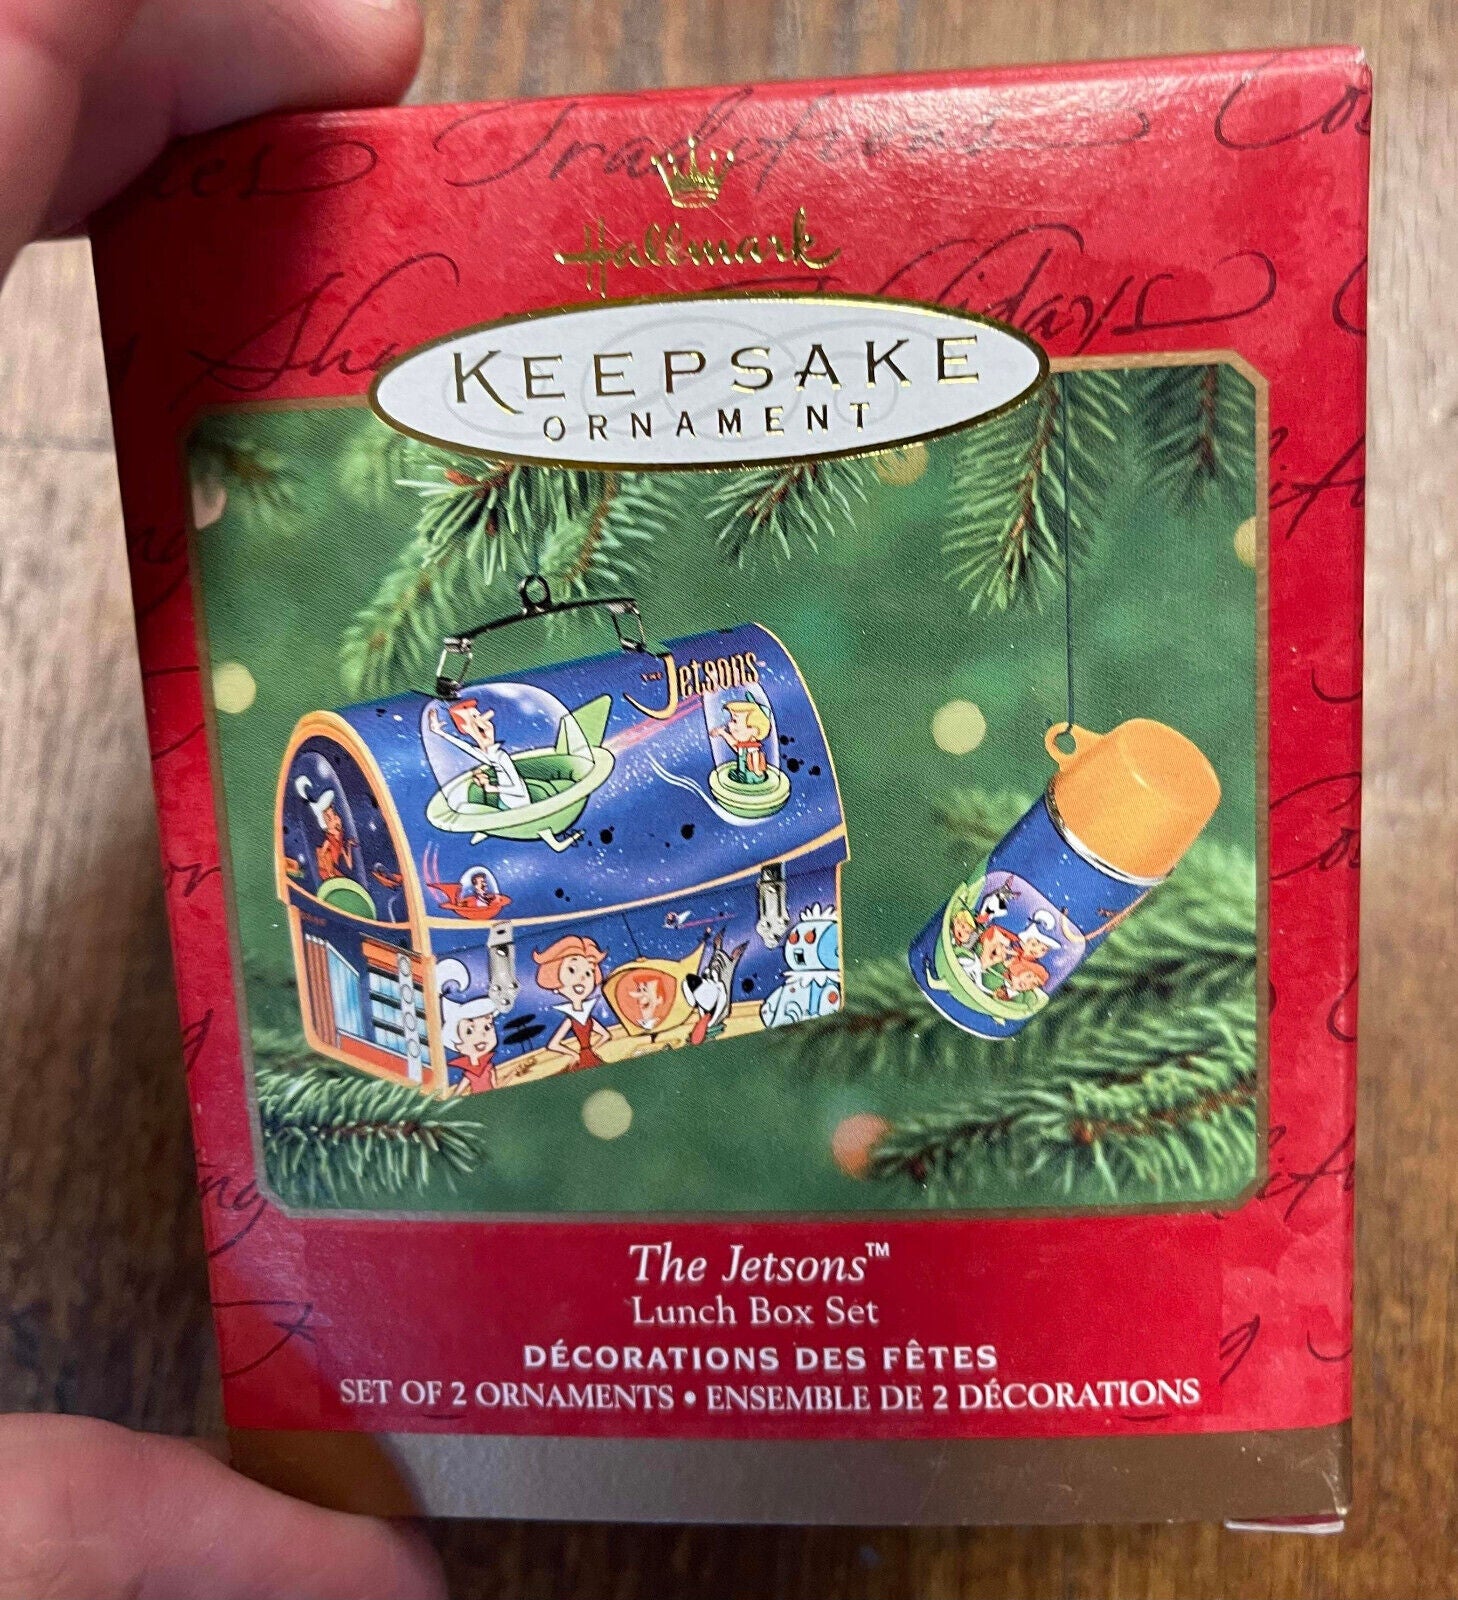 2001 Hallmark Keepsake Ornament 2 Piece The Jetsons Lunch Box Set with Thermos